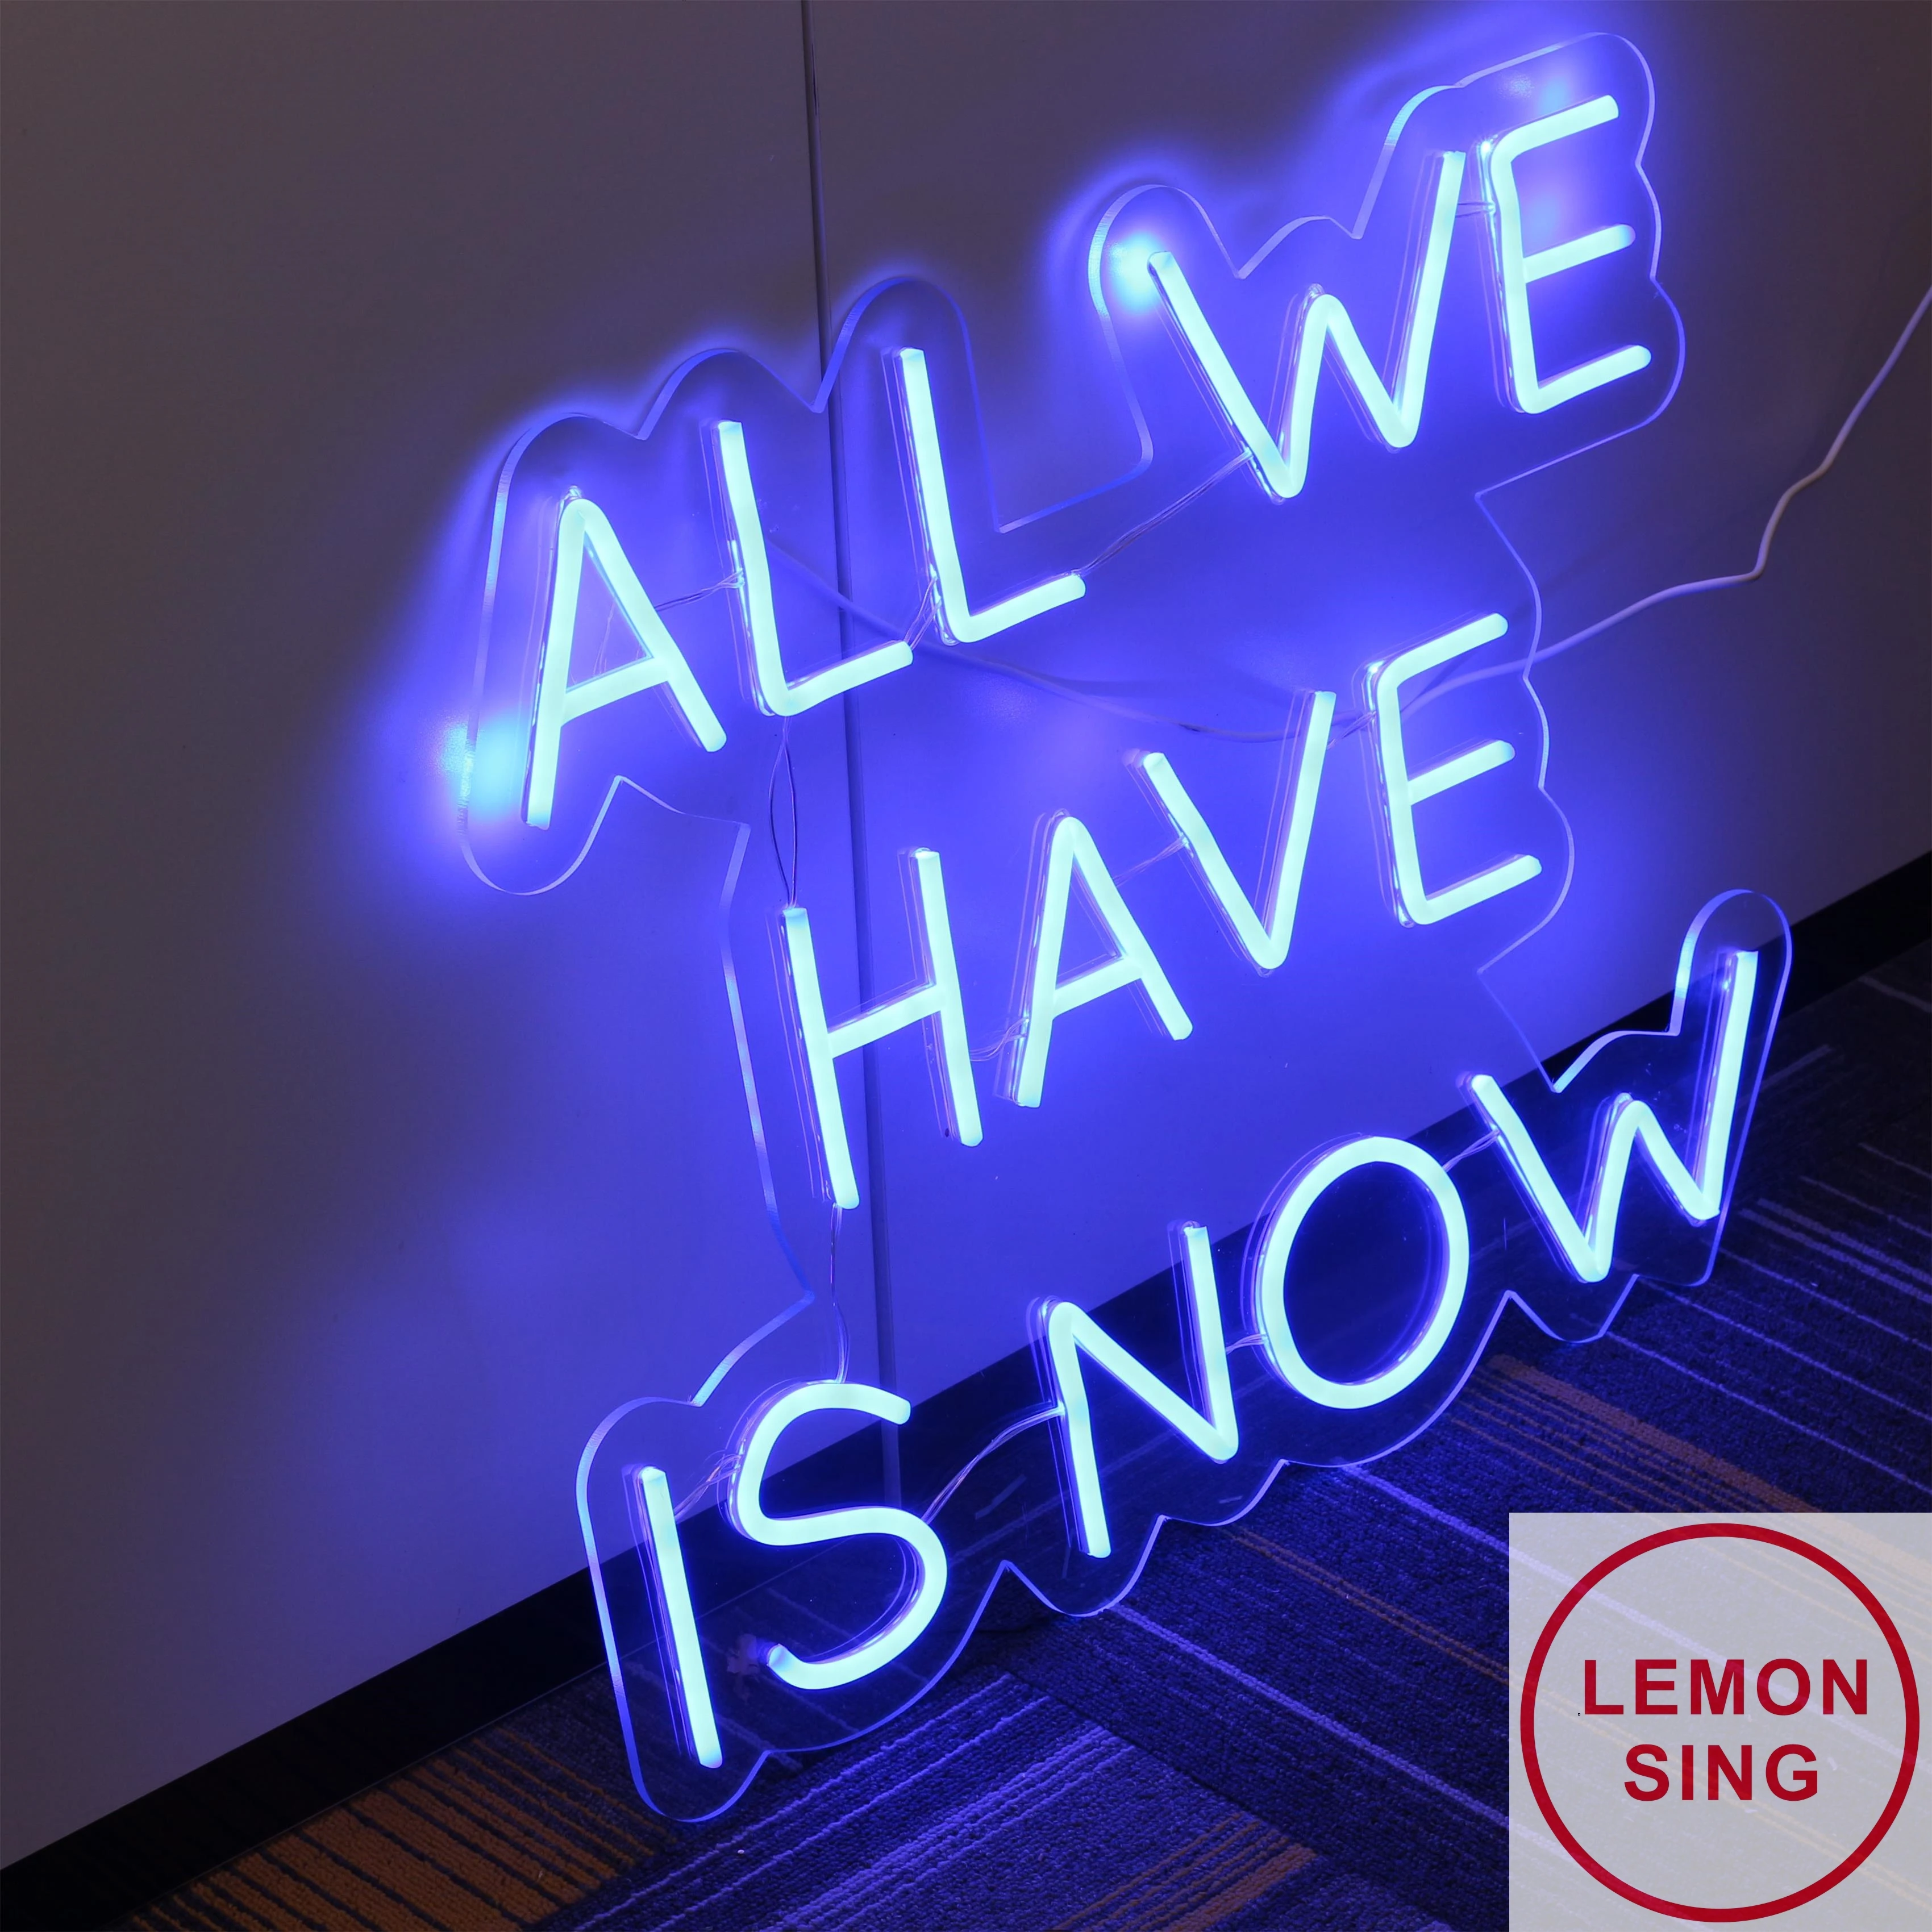 

All We Have Is Now Neon Signs for Bedroom bar Decoration holiday party Light Led Custom Lights Custom Neon Wall Decor